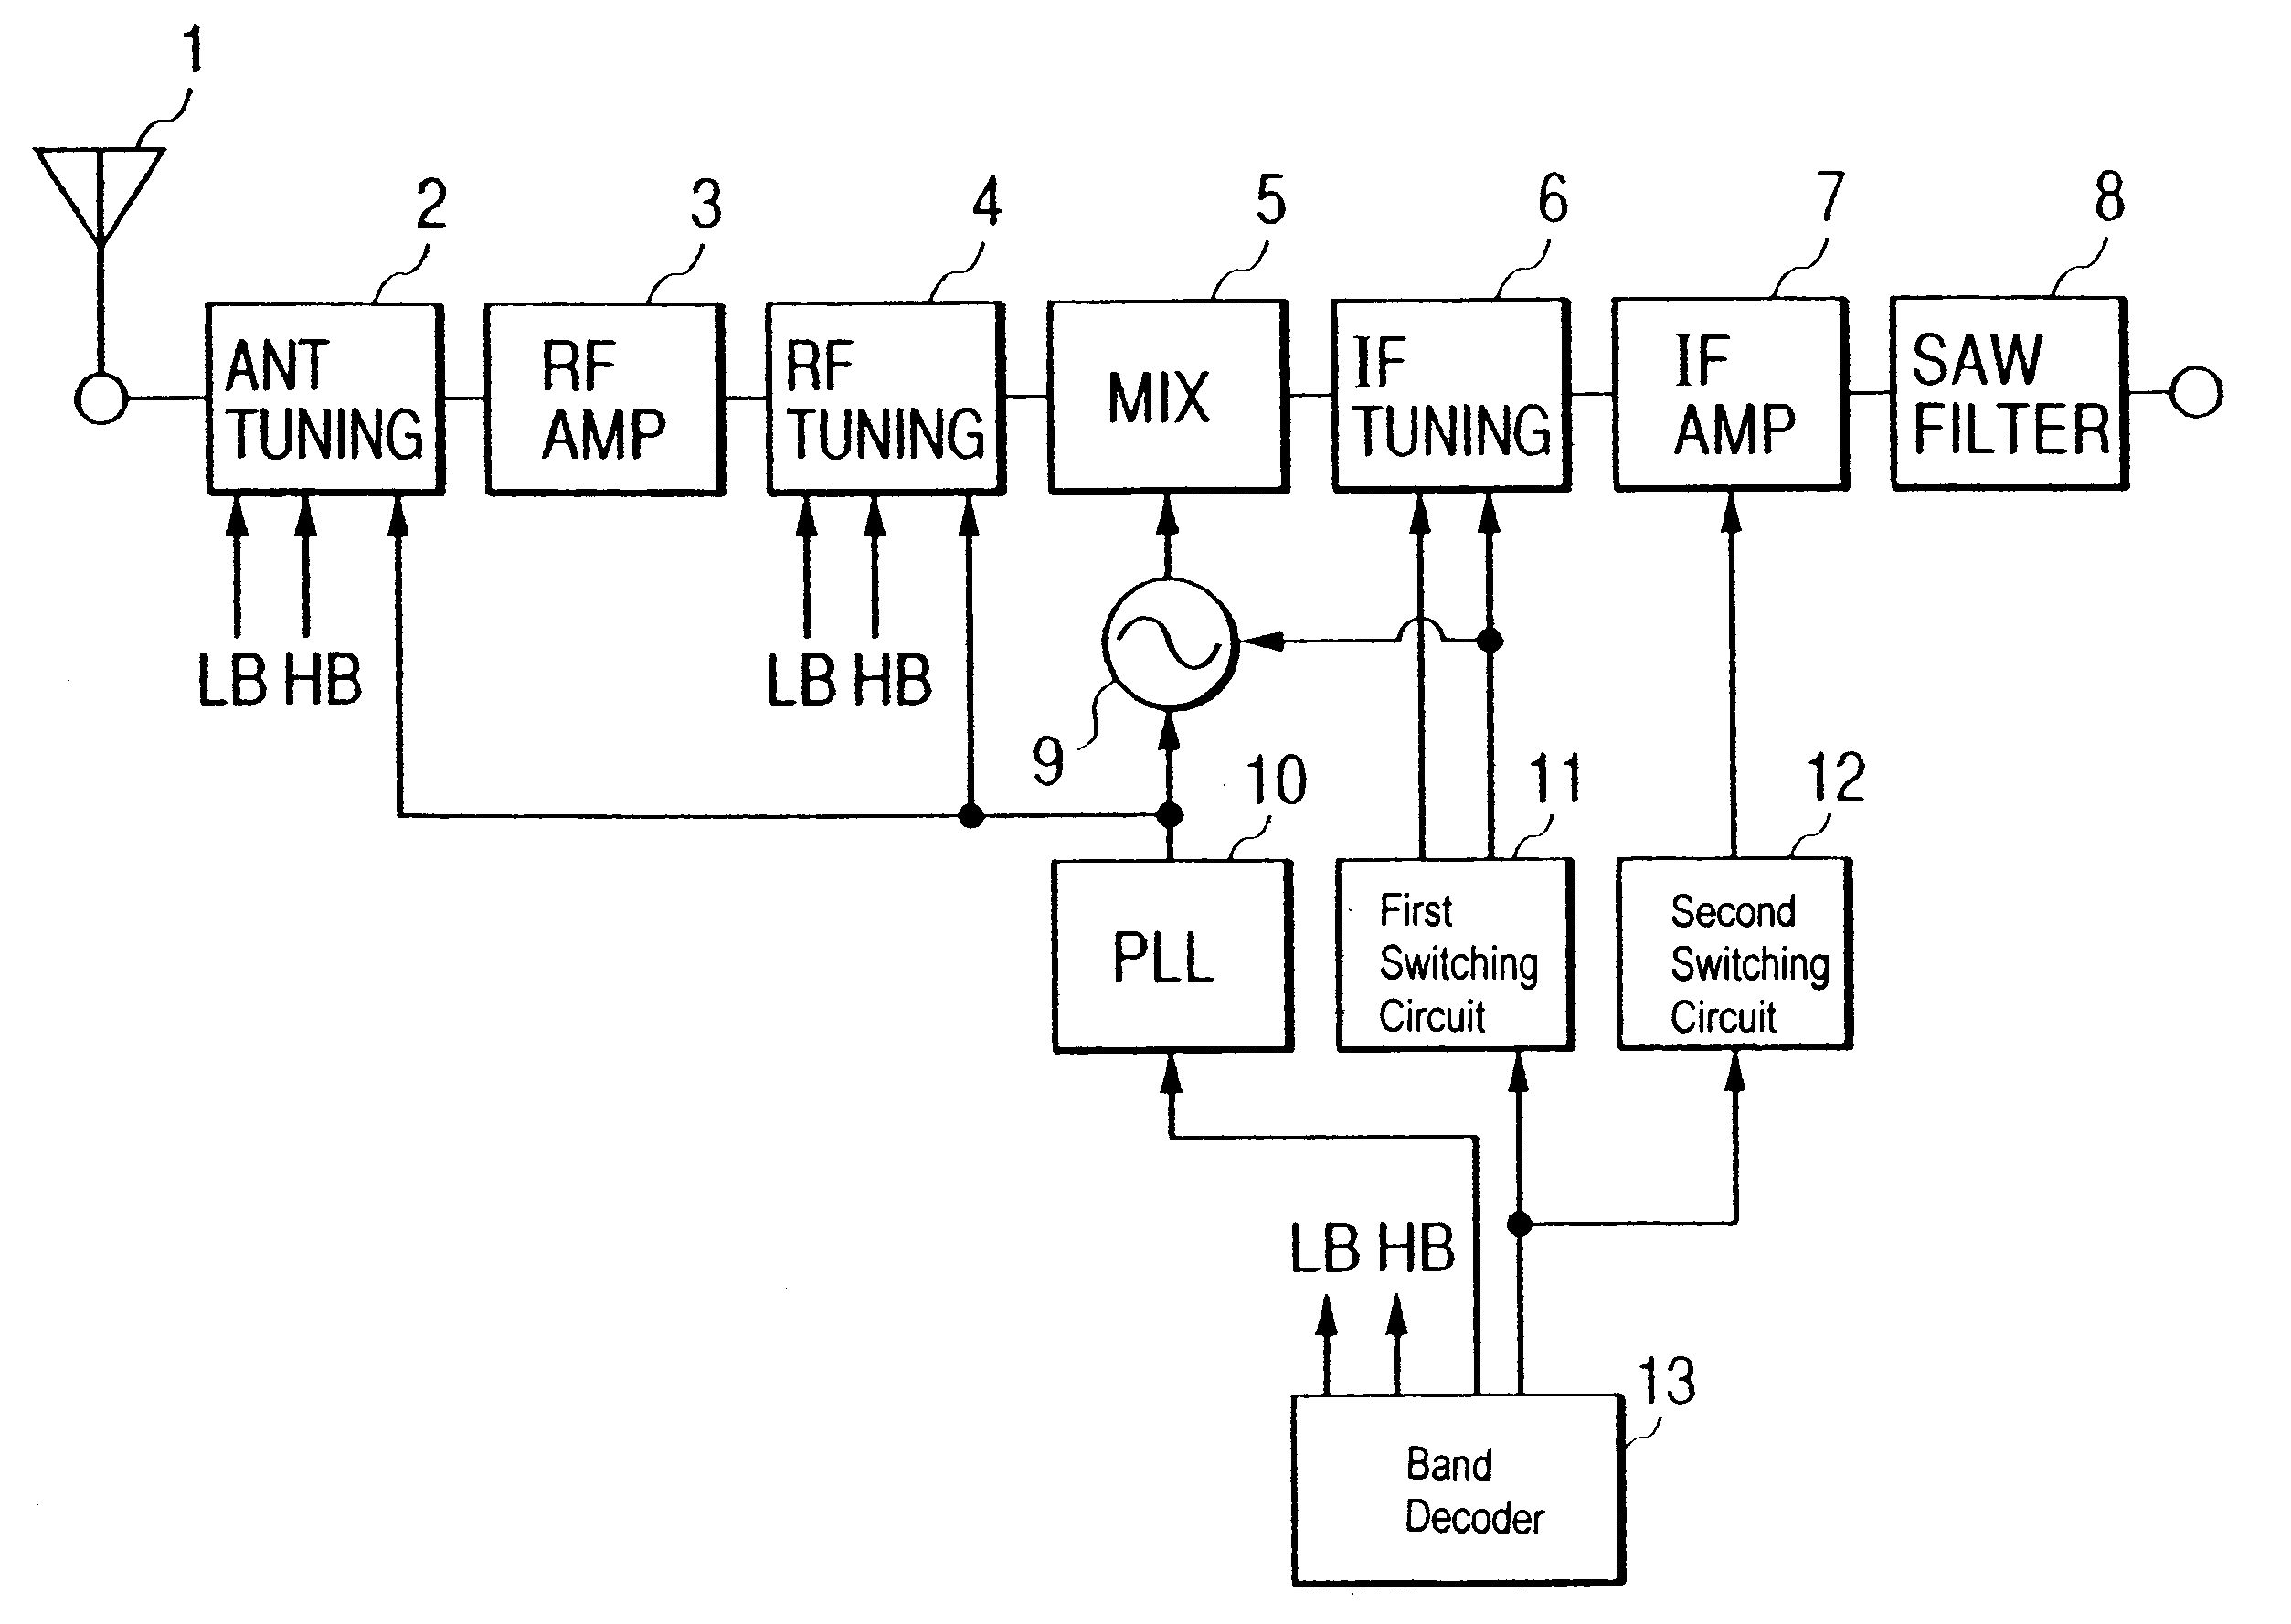 Television tuner capable of receiving FM broadcast